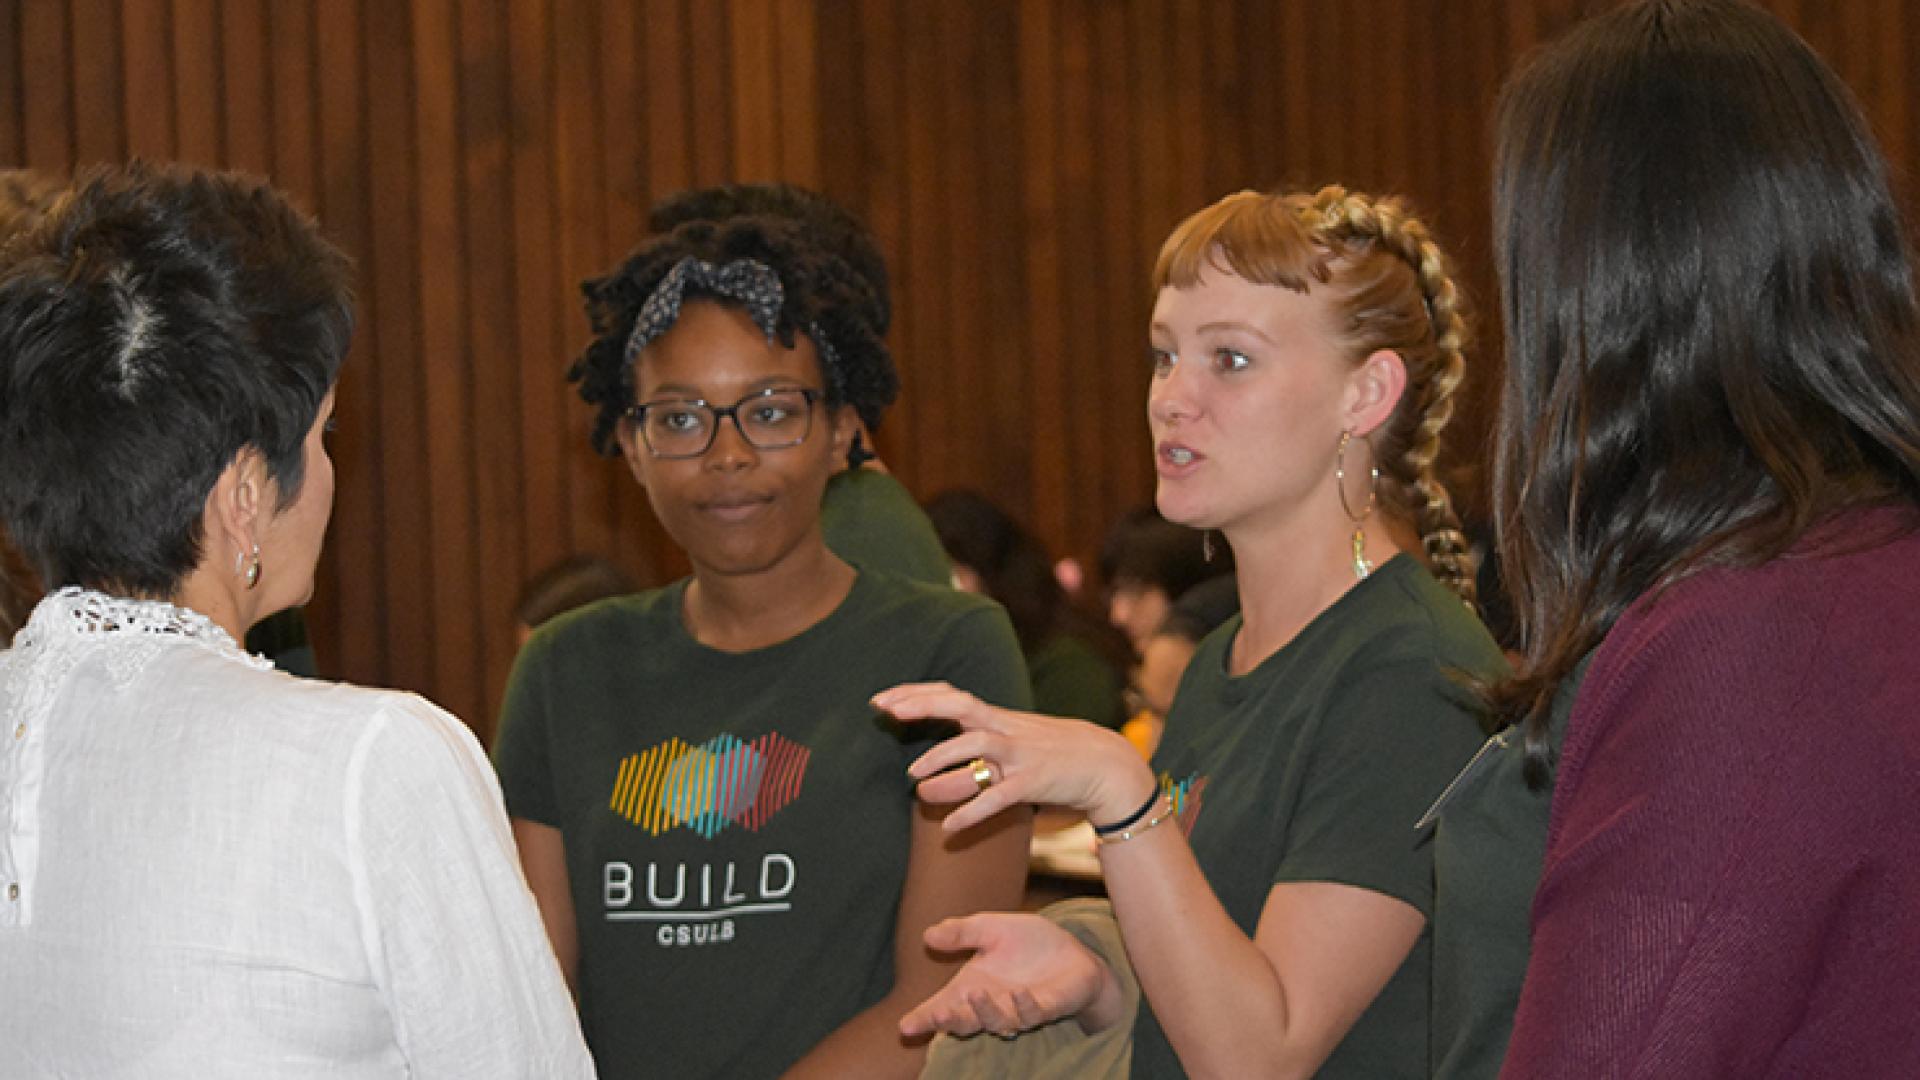 CSULB BUILD Scholar Yohanna Brown and CSULB BUILD Fellow Kennedy Blevins